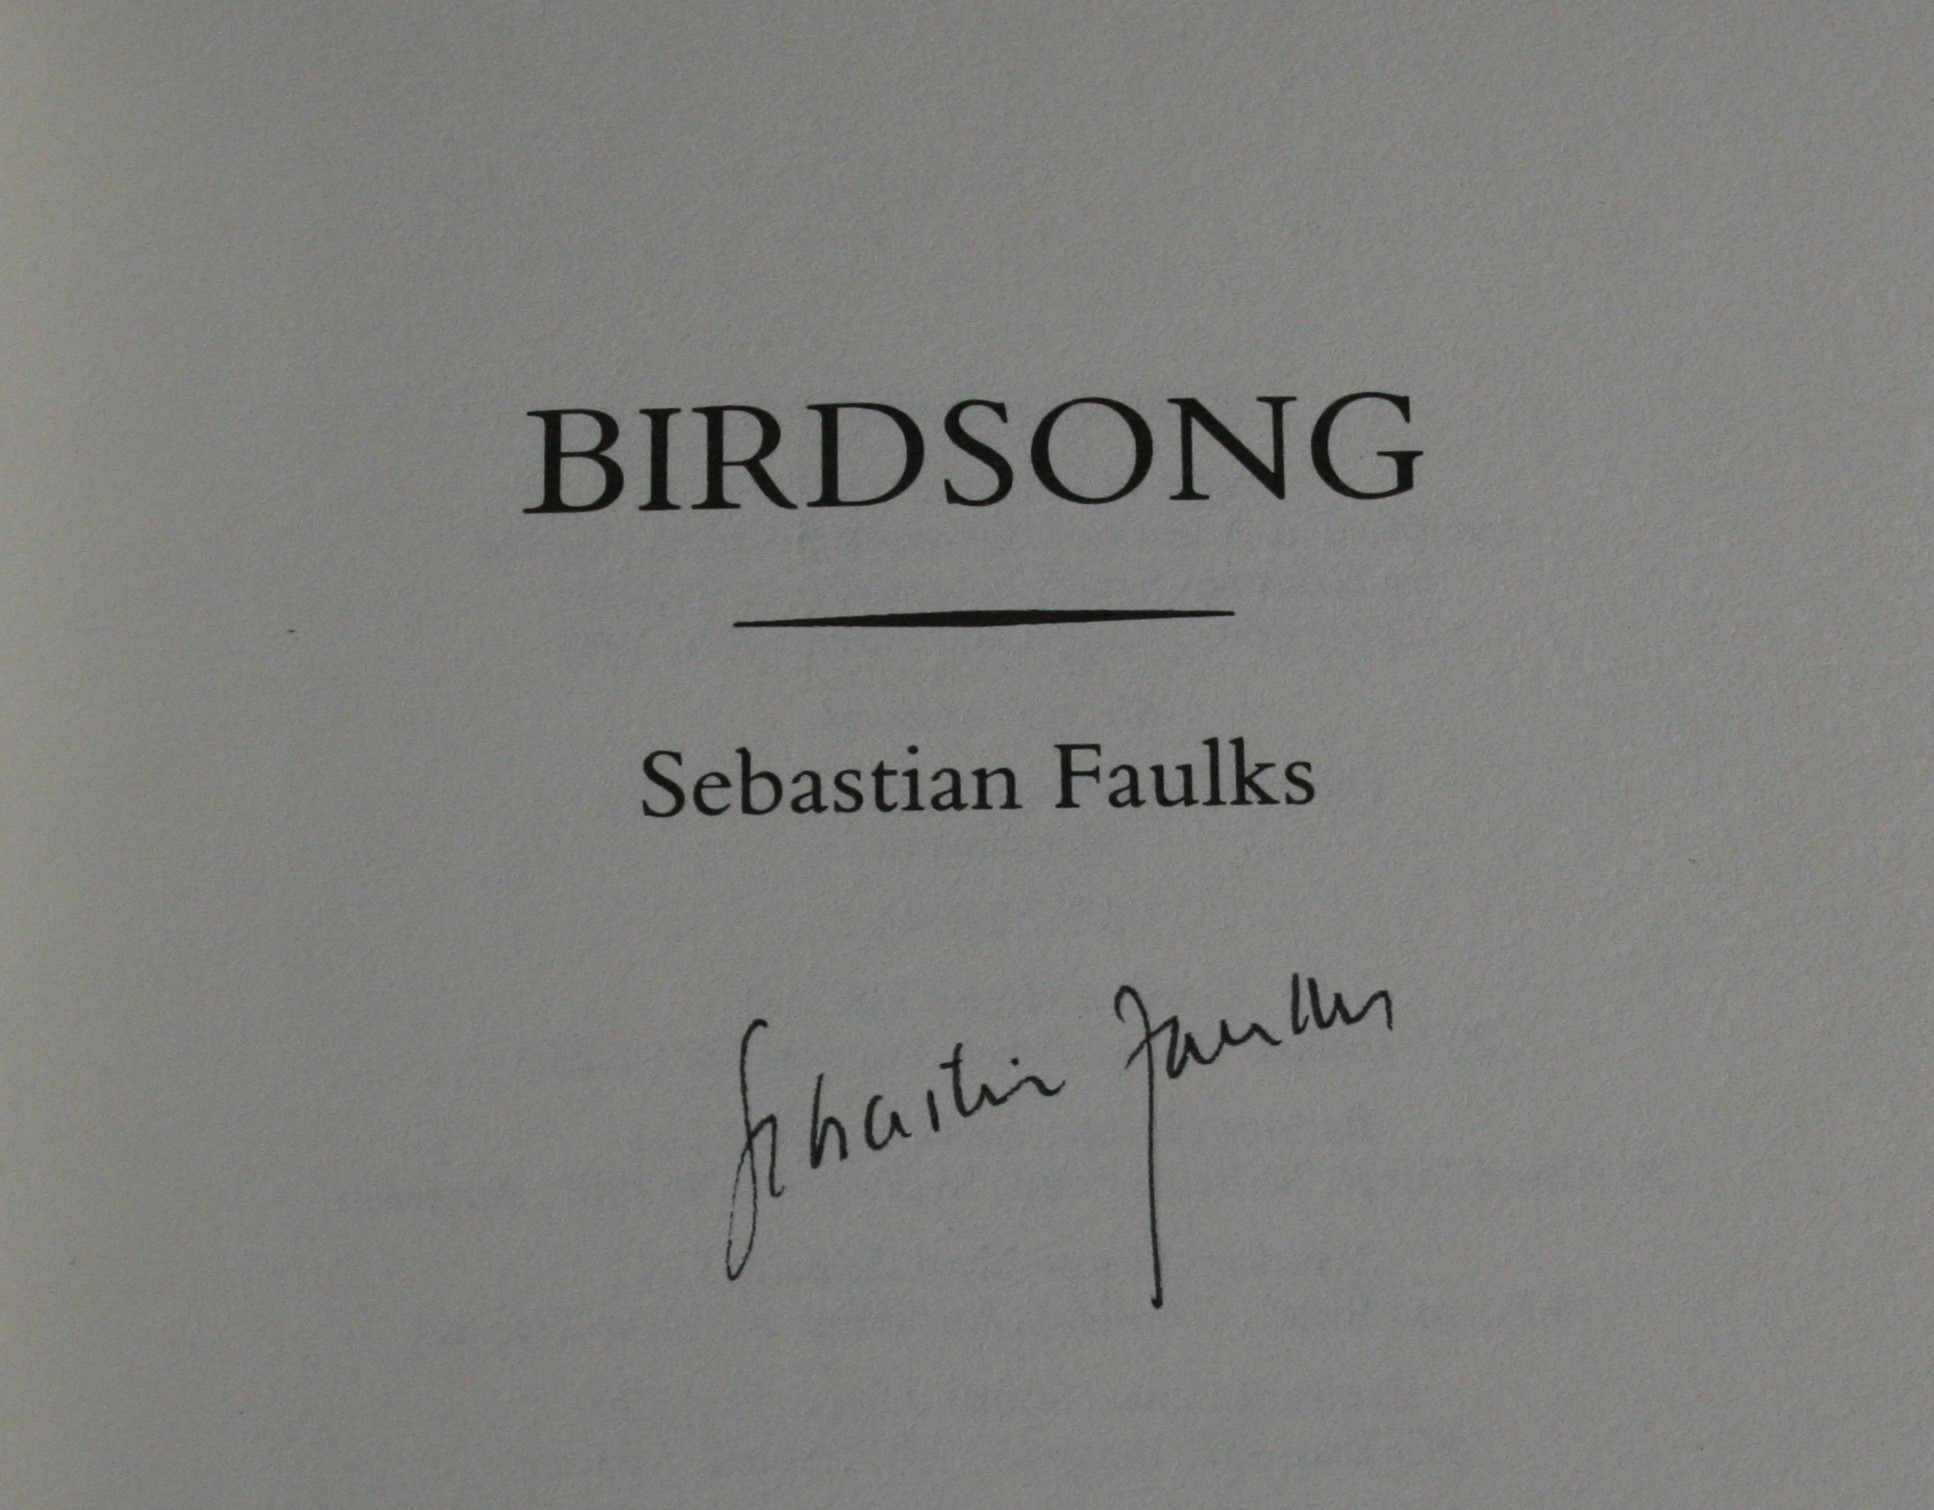 FAULKS, Sebastian, Birdsong. Hutchinson, London, 1993 1 st ed. AUTHOR SIGNED to title page. With - Image 2 of 3